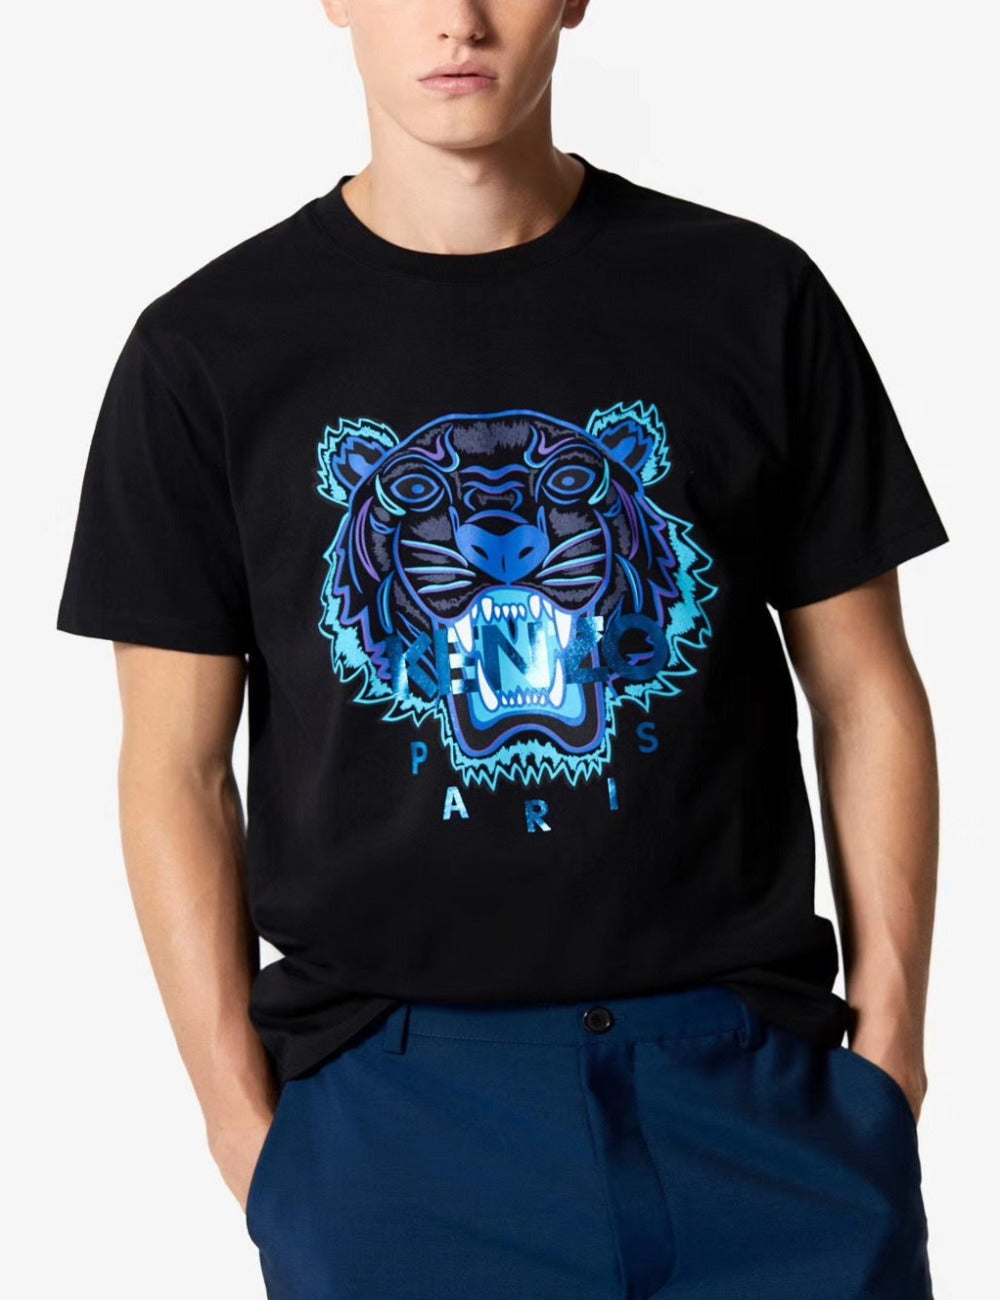 Kenzo Blue Tiger Logo T-Shirt - Shop Streetwear, Sneakers, Slippers and Gifts online | Malaysia - The Factory KL